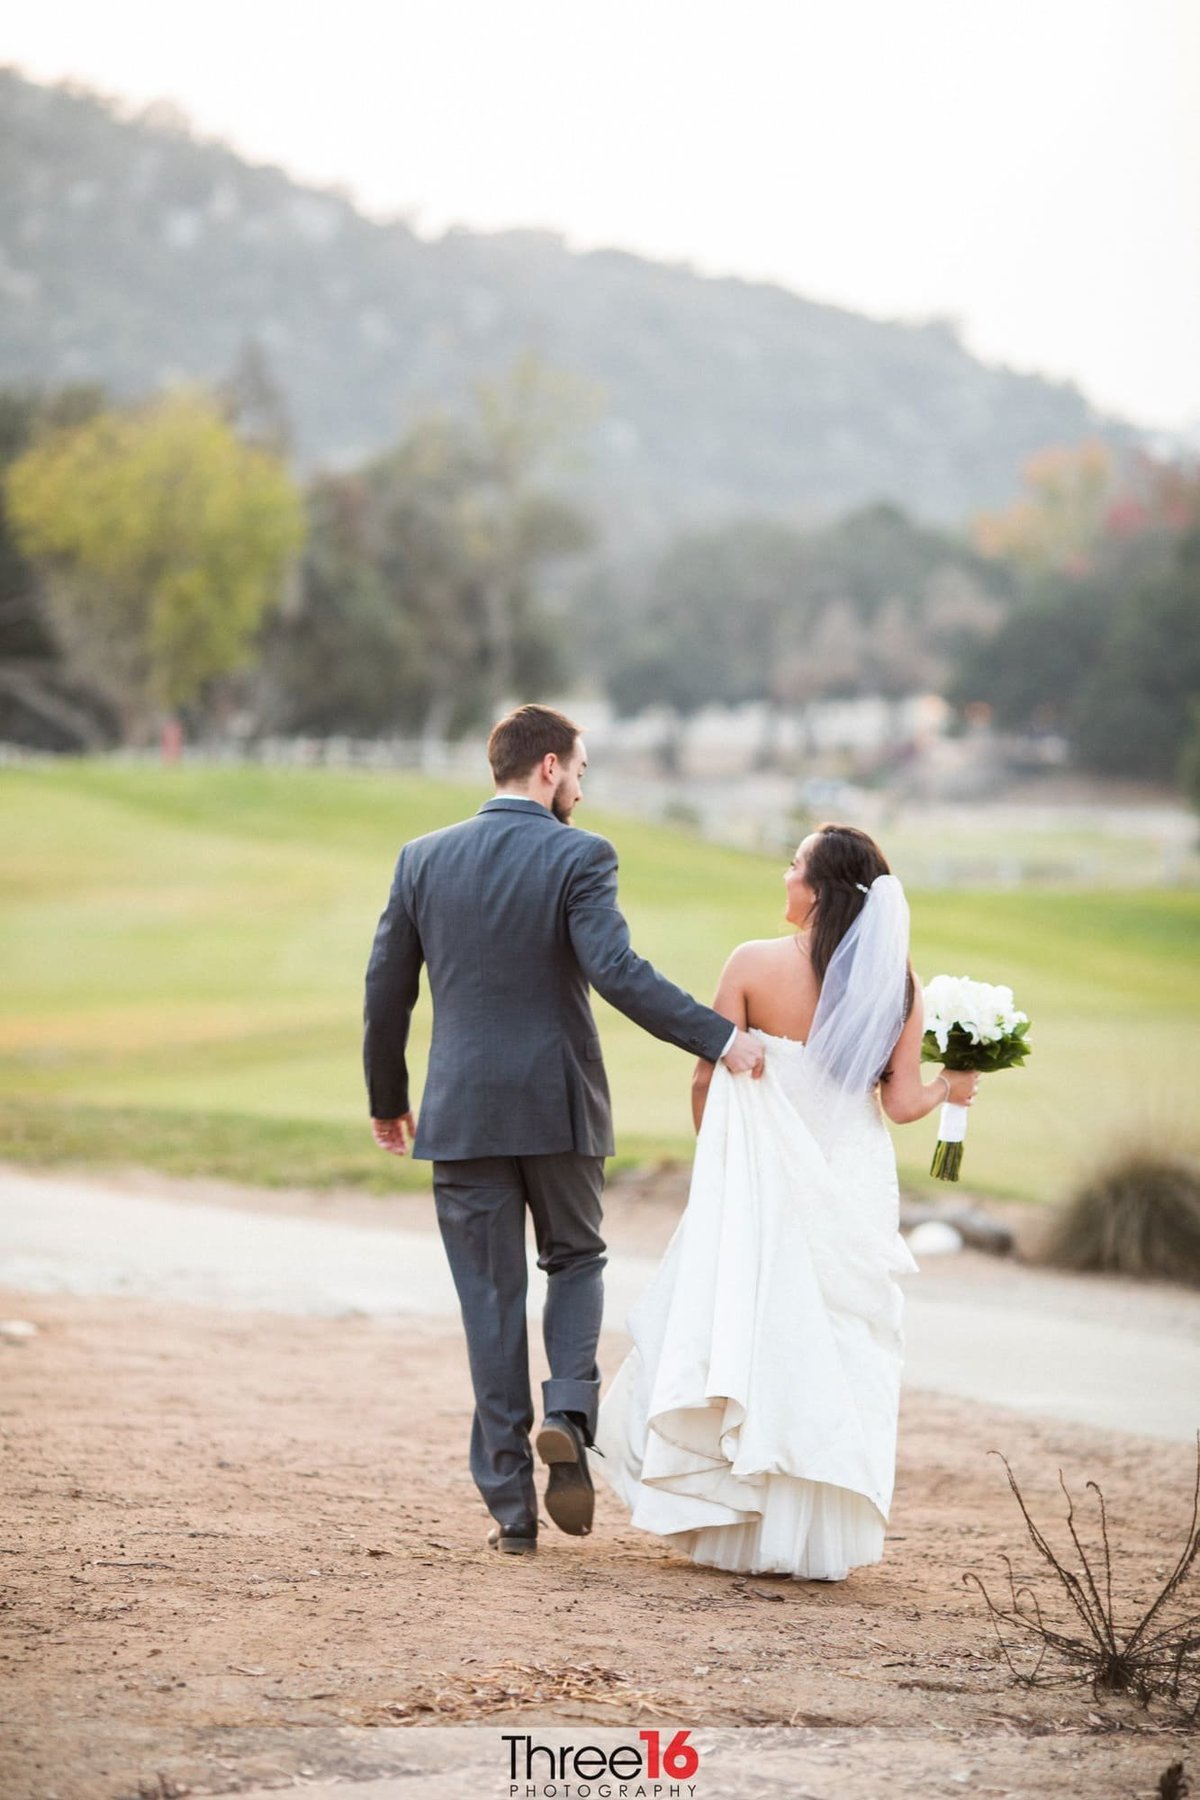 Groom carries his Bride's dress train as they walk towards the golf course